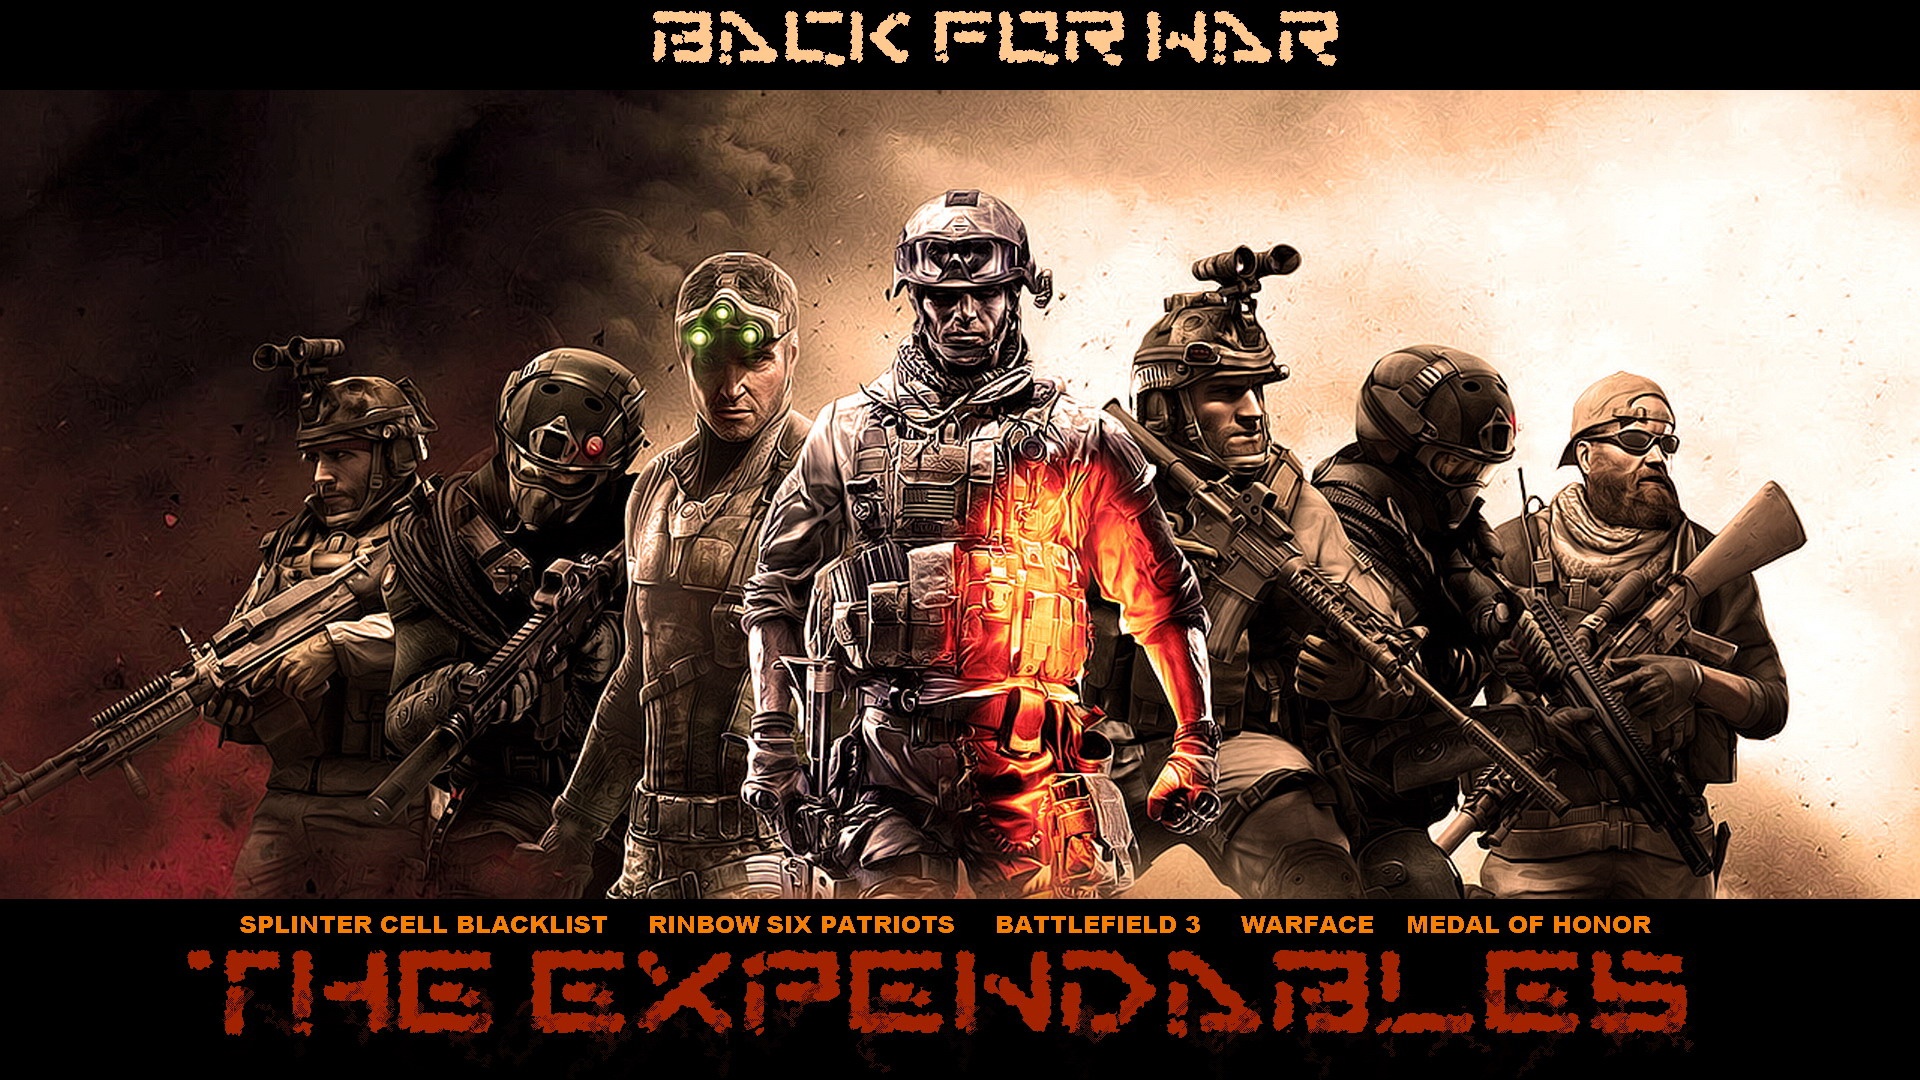 Free download Wallpaper Main Characters Splinter Cell Battlefield Expendables [1920x1080] for your Desktop, Mobile & Tablet. Explore PSP Game Wallpaper. Psp Wallpaper, PSP Wallpaper, PSP Wallpaper Download